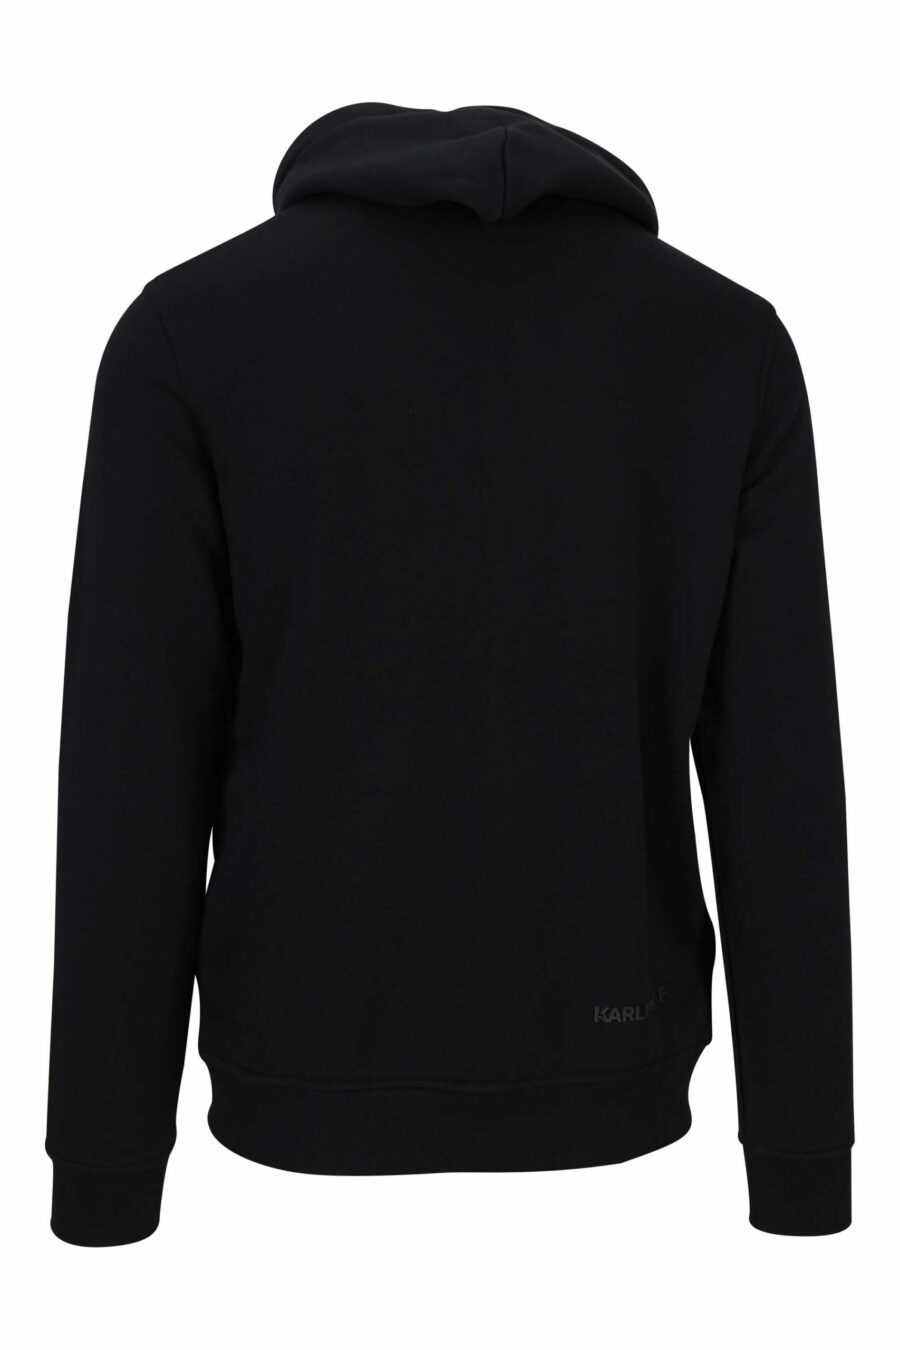 Black hooded sweatshirt with "rue st guillaume" logo in white lettering - 4062226649667 1 1 scaled